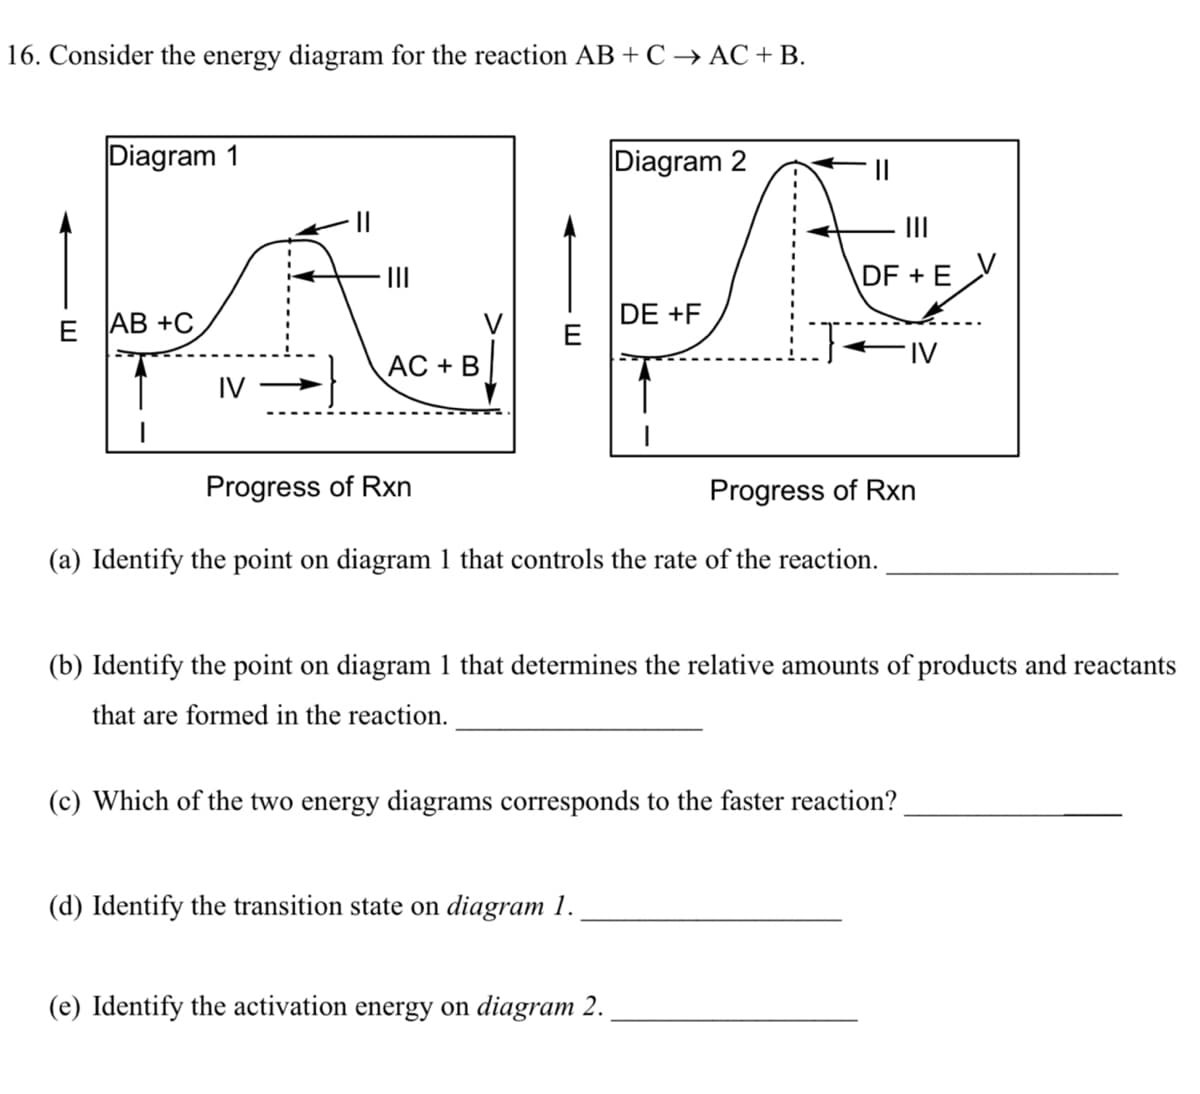 16. Consider the energy diagram for the reaction AB + C → AC +B.
Diagram 1
Diagram 2
II
II
DF + E
Е АВ +C
DE +F
E
FIV
АC + В
IV
Progress of Rxn
Progress of Rxn
(a) Identify the point on diagram 1 that controls the rate of the reaction.
(b) Identify the point on diagram 1 that determines the relative amounts of products and reactants
that are formed in the reaction.
(c) Which of the two energy diagrams corresponds to the faster reaction?
(d) Identify the transition state on diagram 1.
(e) Identify the activation energy on diagram 2.
